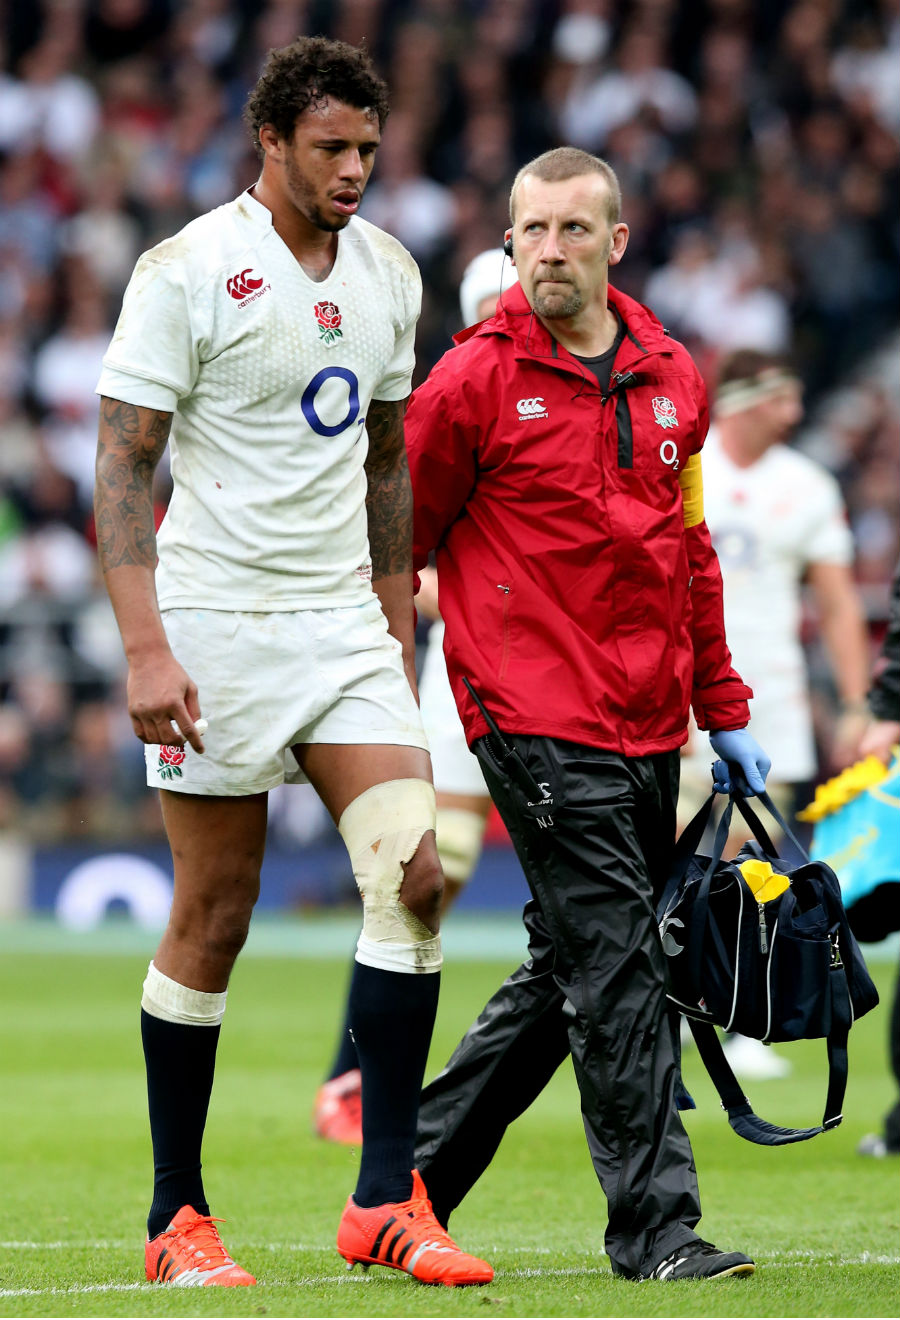 Courtney Lawes was taken off after just 22 minutes after suffering a blow to the head